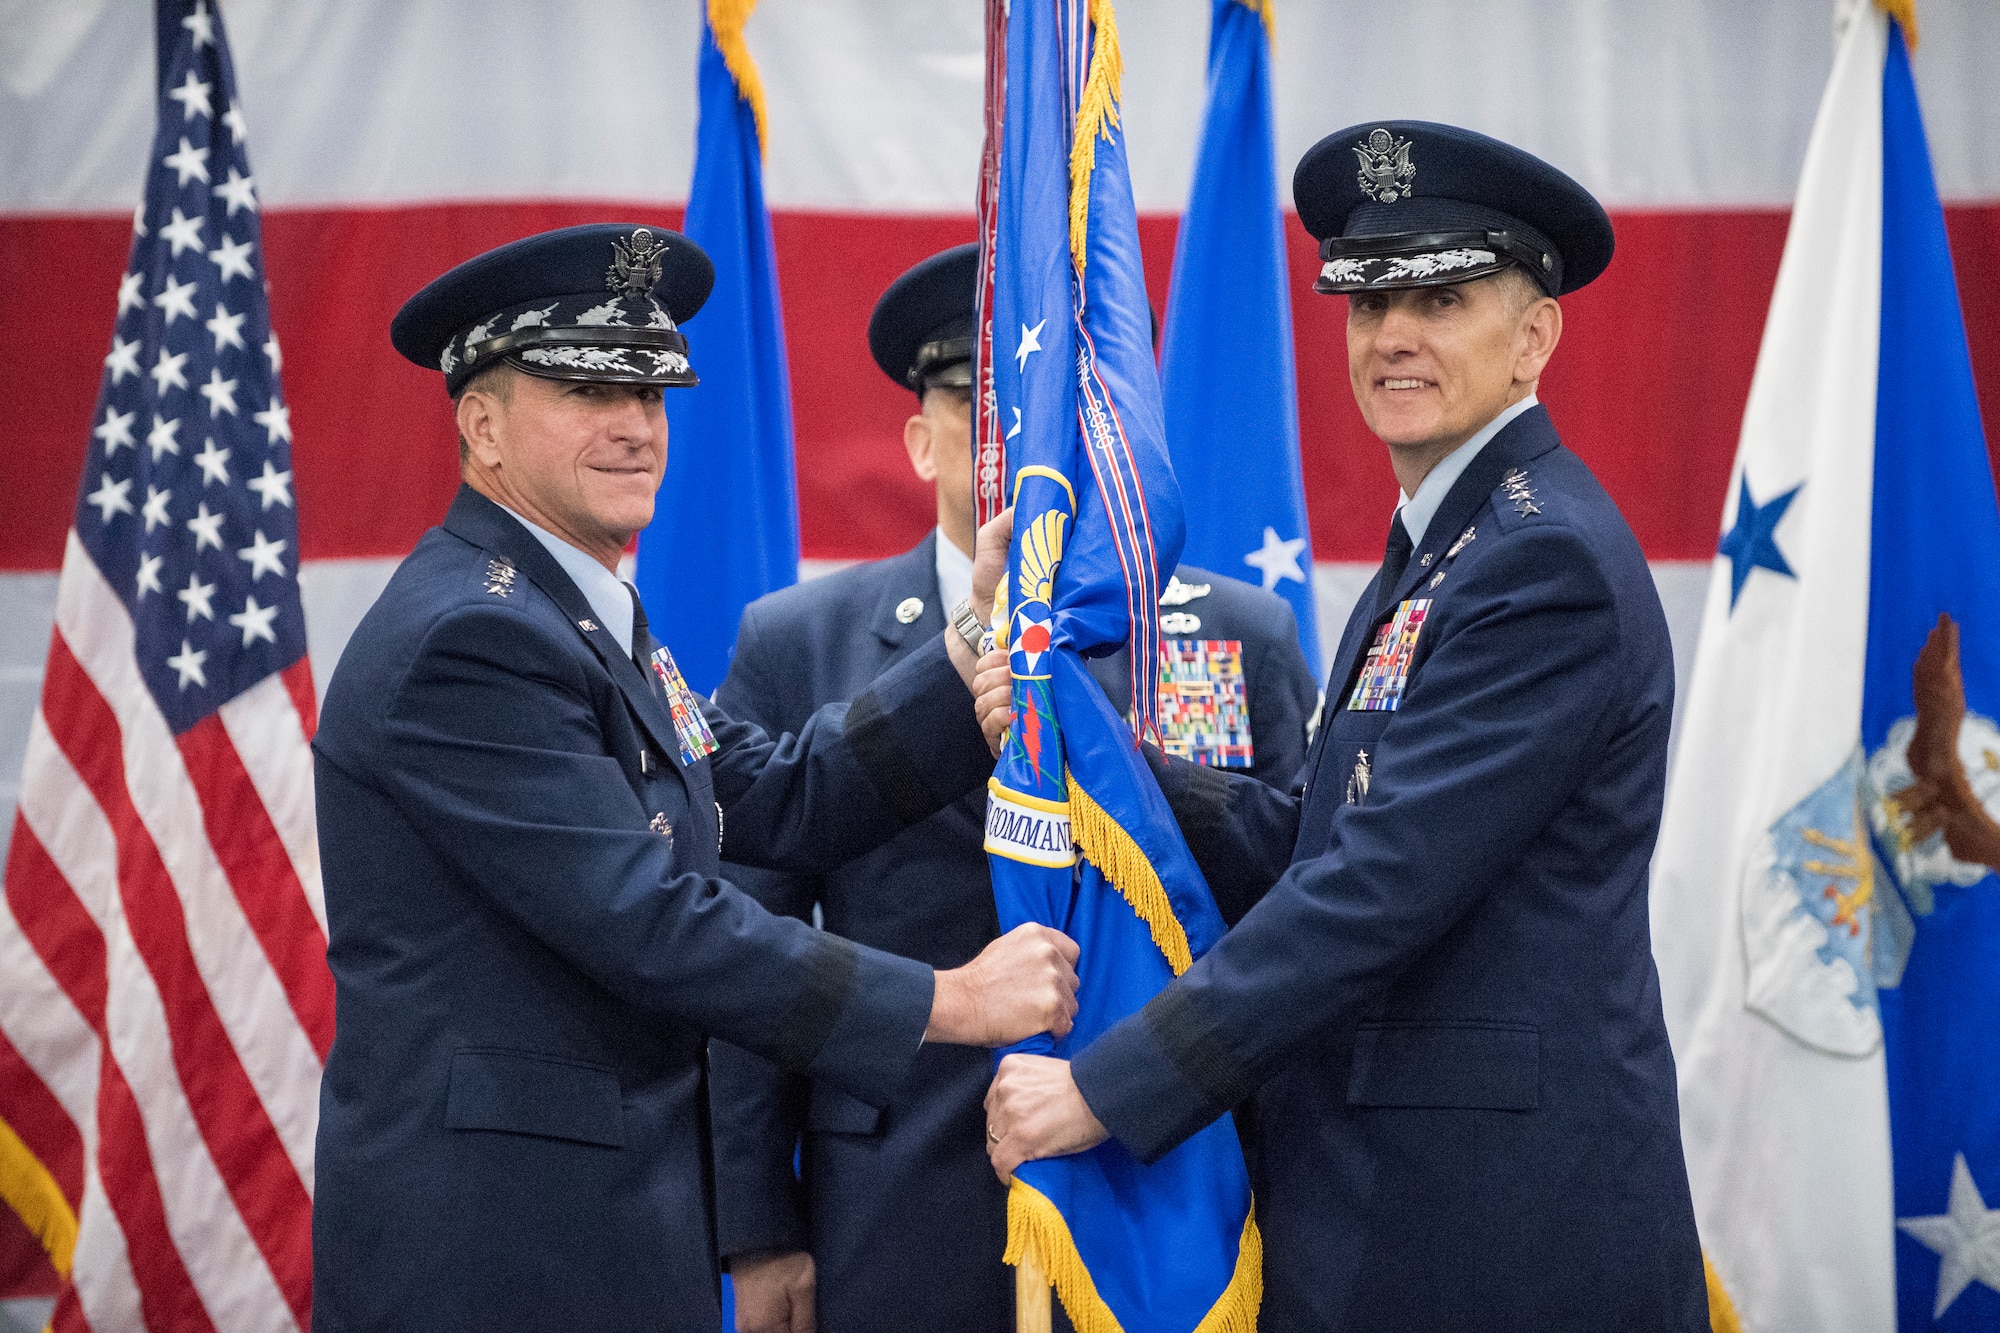 Gen. Timothy Ray accepts the Air Force Global Strike Command guidon from the Air Force Chief of Staff Gen. David L. Goldfein during a change of command ceremony at Barksdale Air Force Base, La., Aug. 21, 2018.